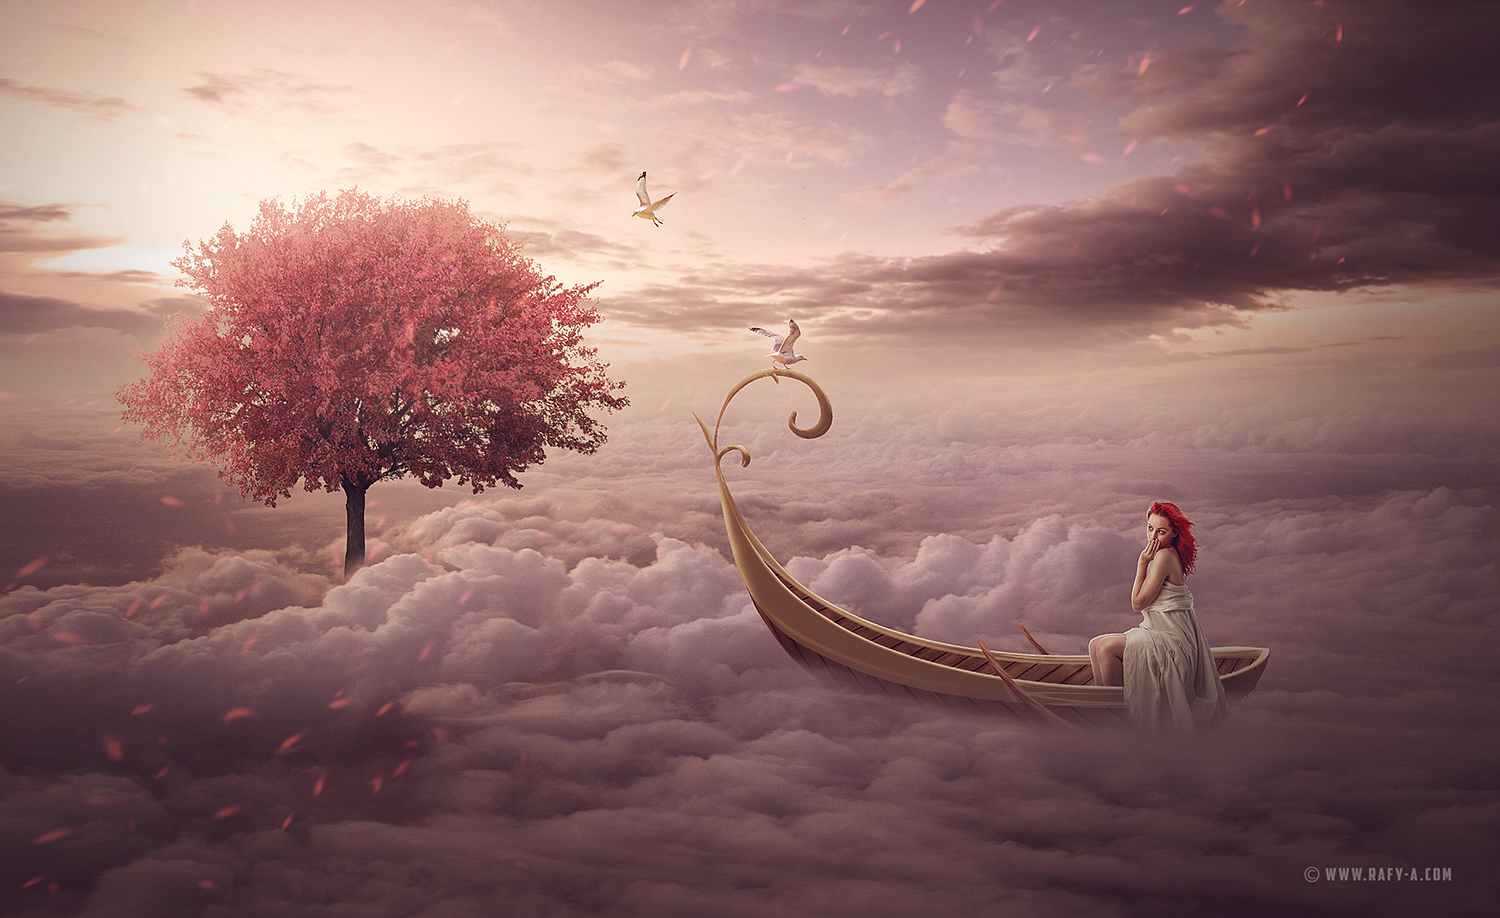 How To Make Fantasy Manipulation Scene Effect In Photoshop Rafy A